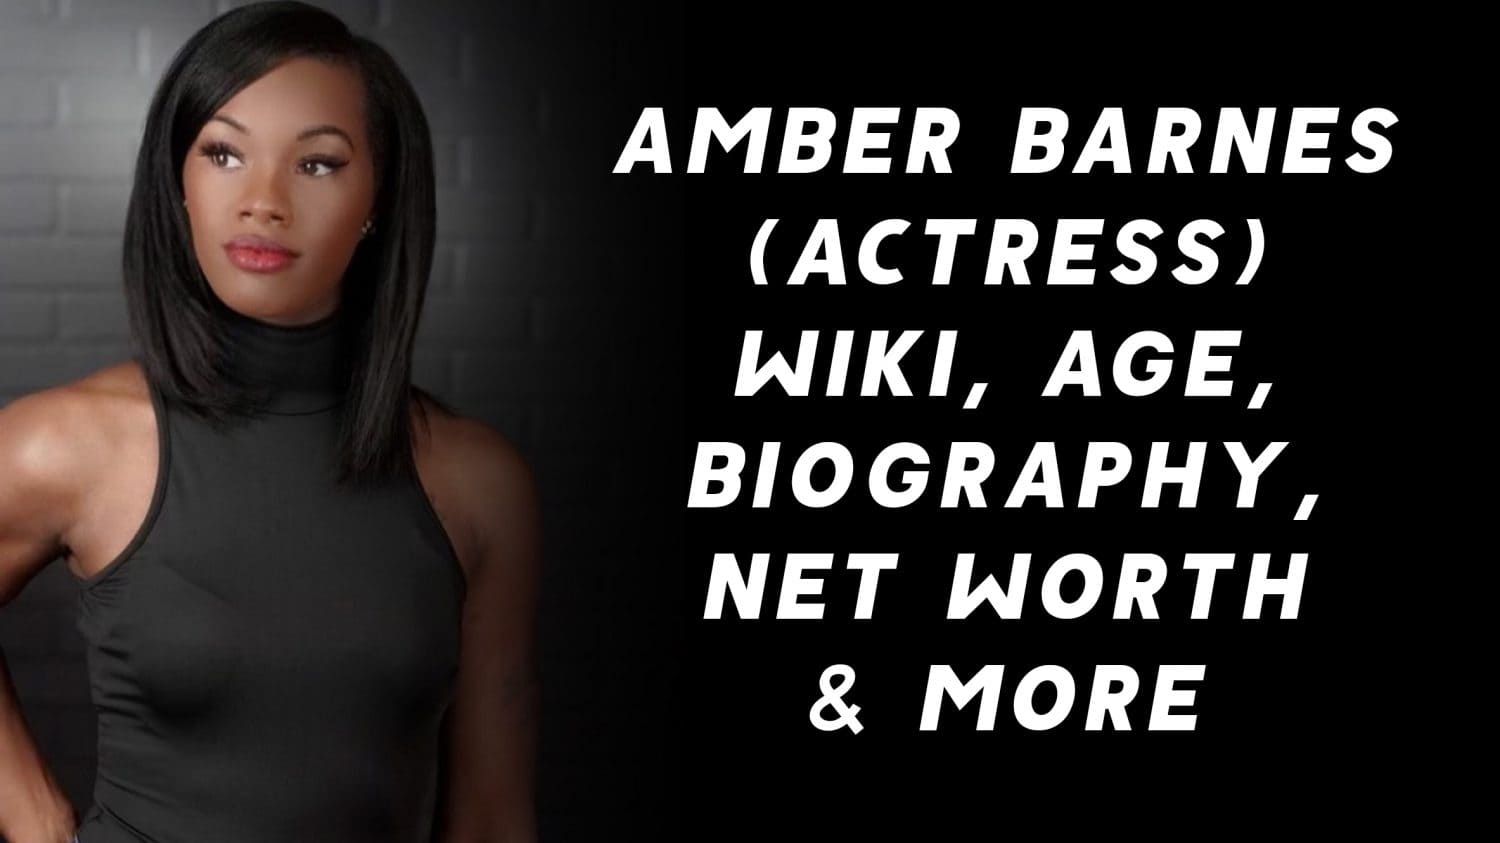 Amber Barnes (Actress) Wiki, Age, Biography, Net Worth & More 1